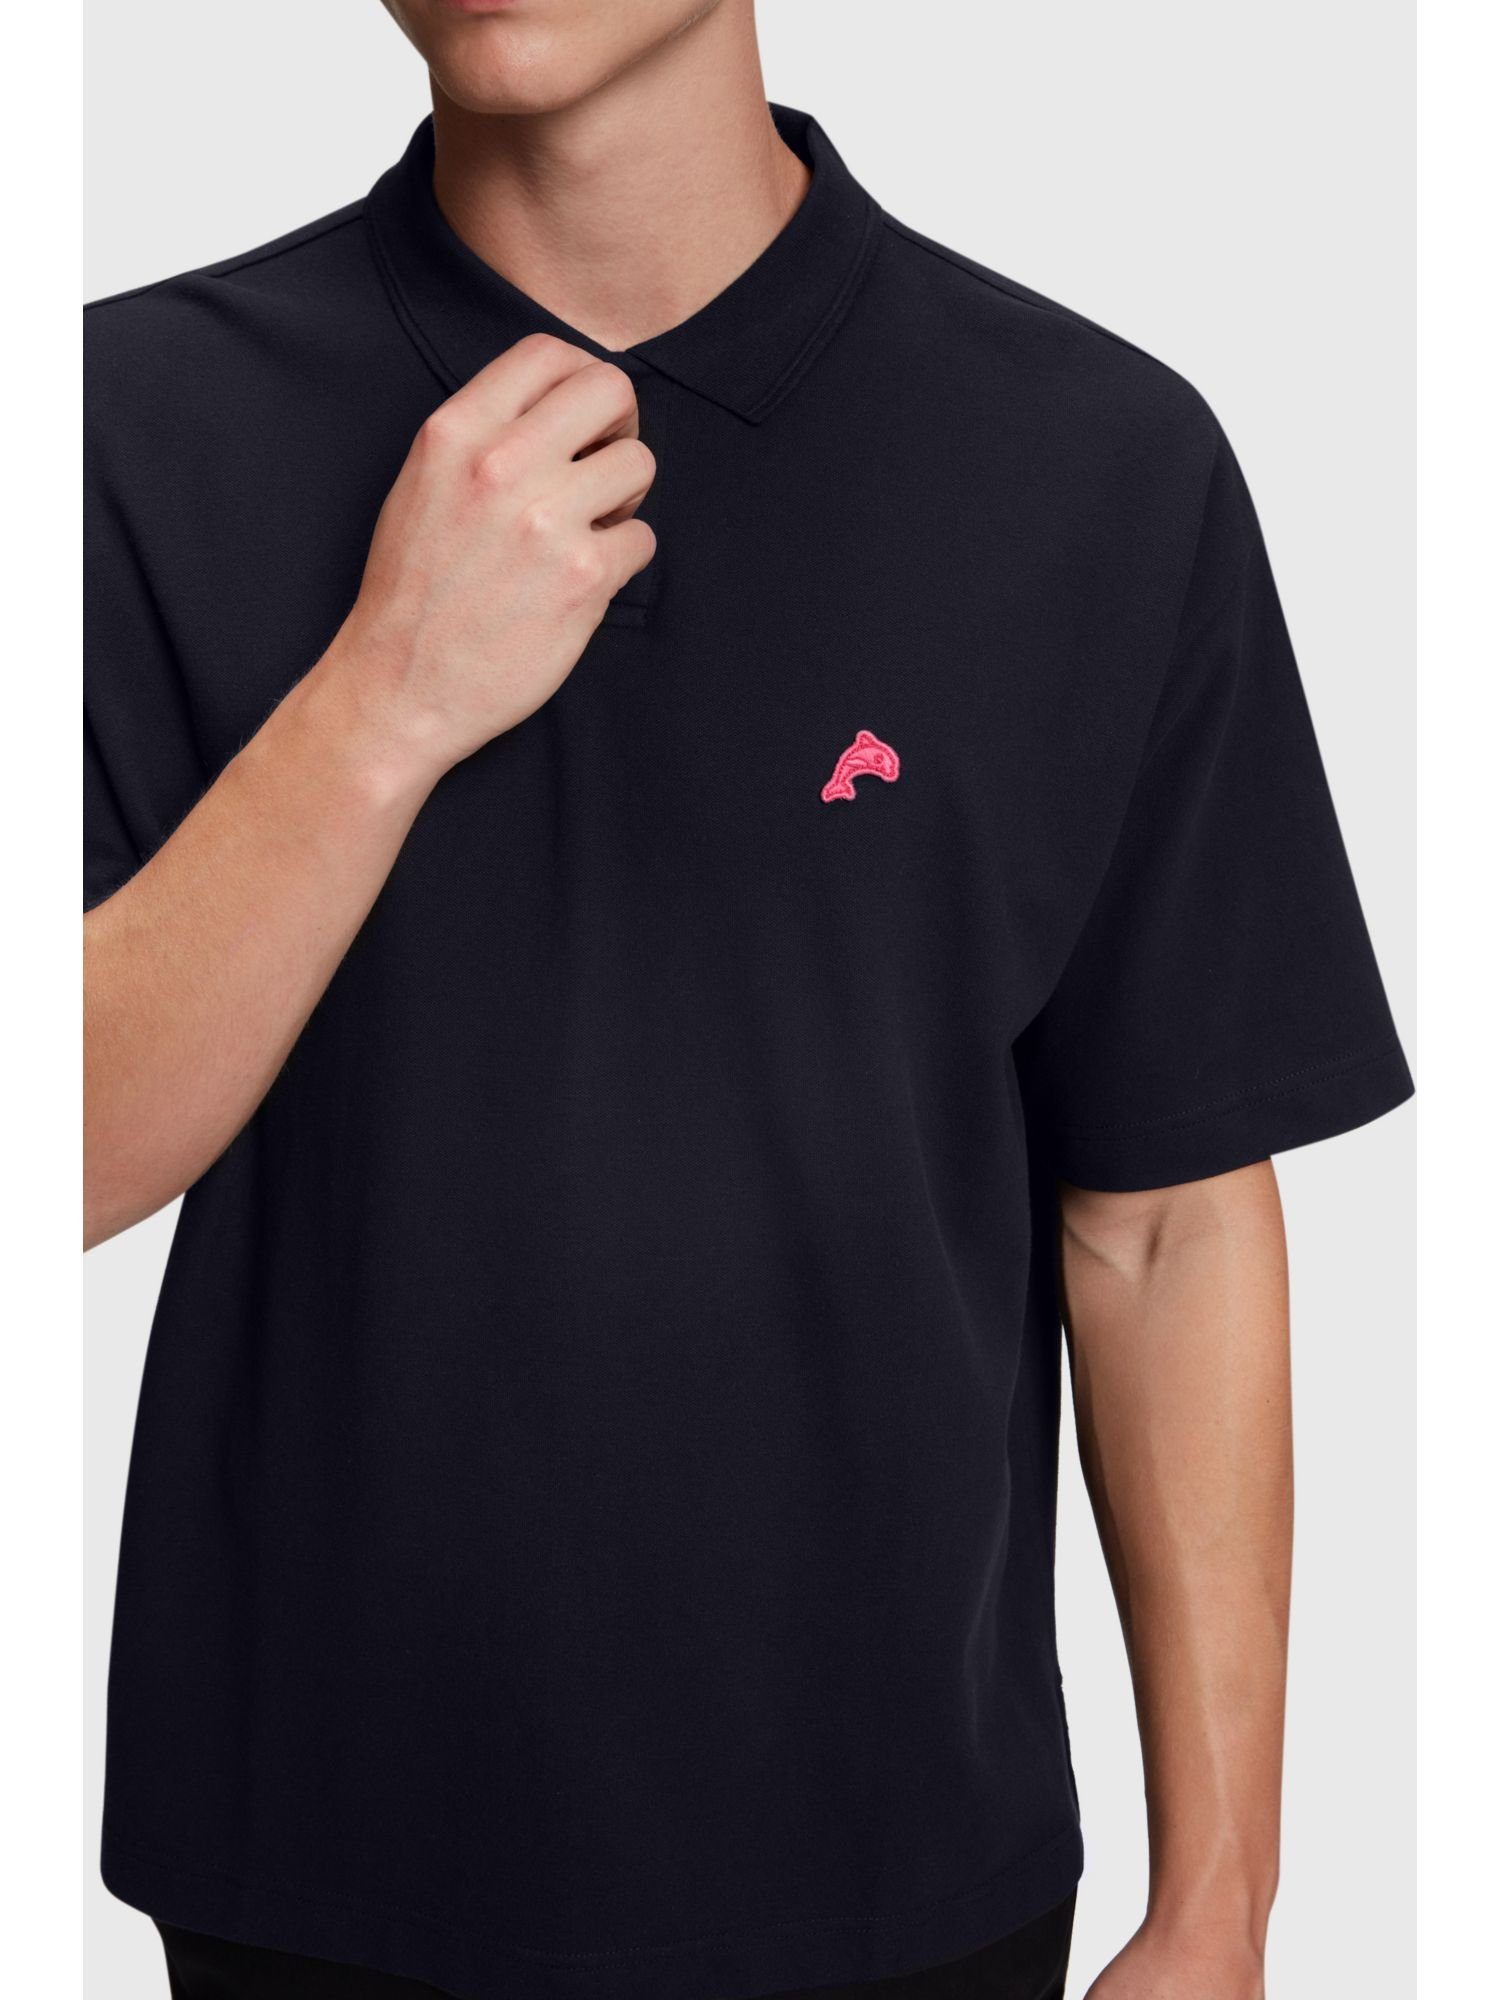 Esprit Dolphin-Badge Relaxed BLACK Poloshirt Fit mit Poloshirt